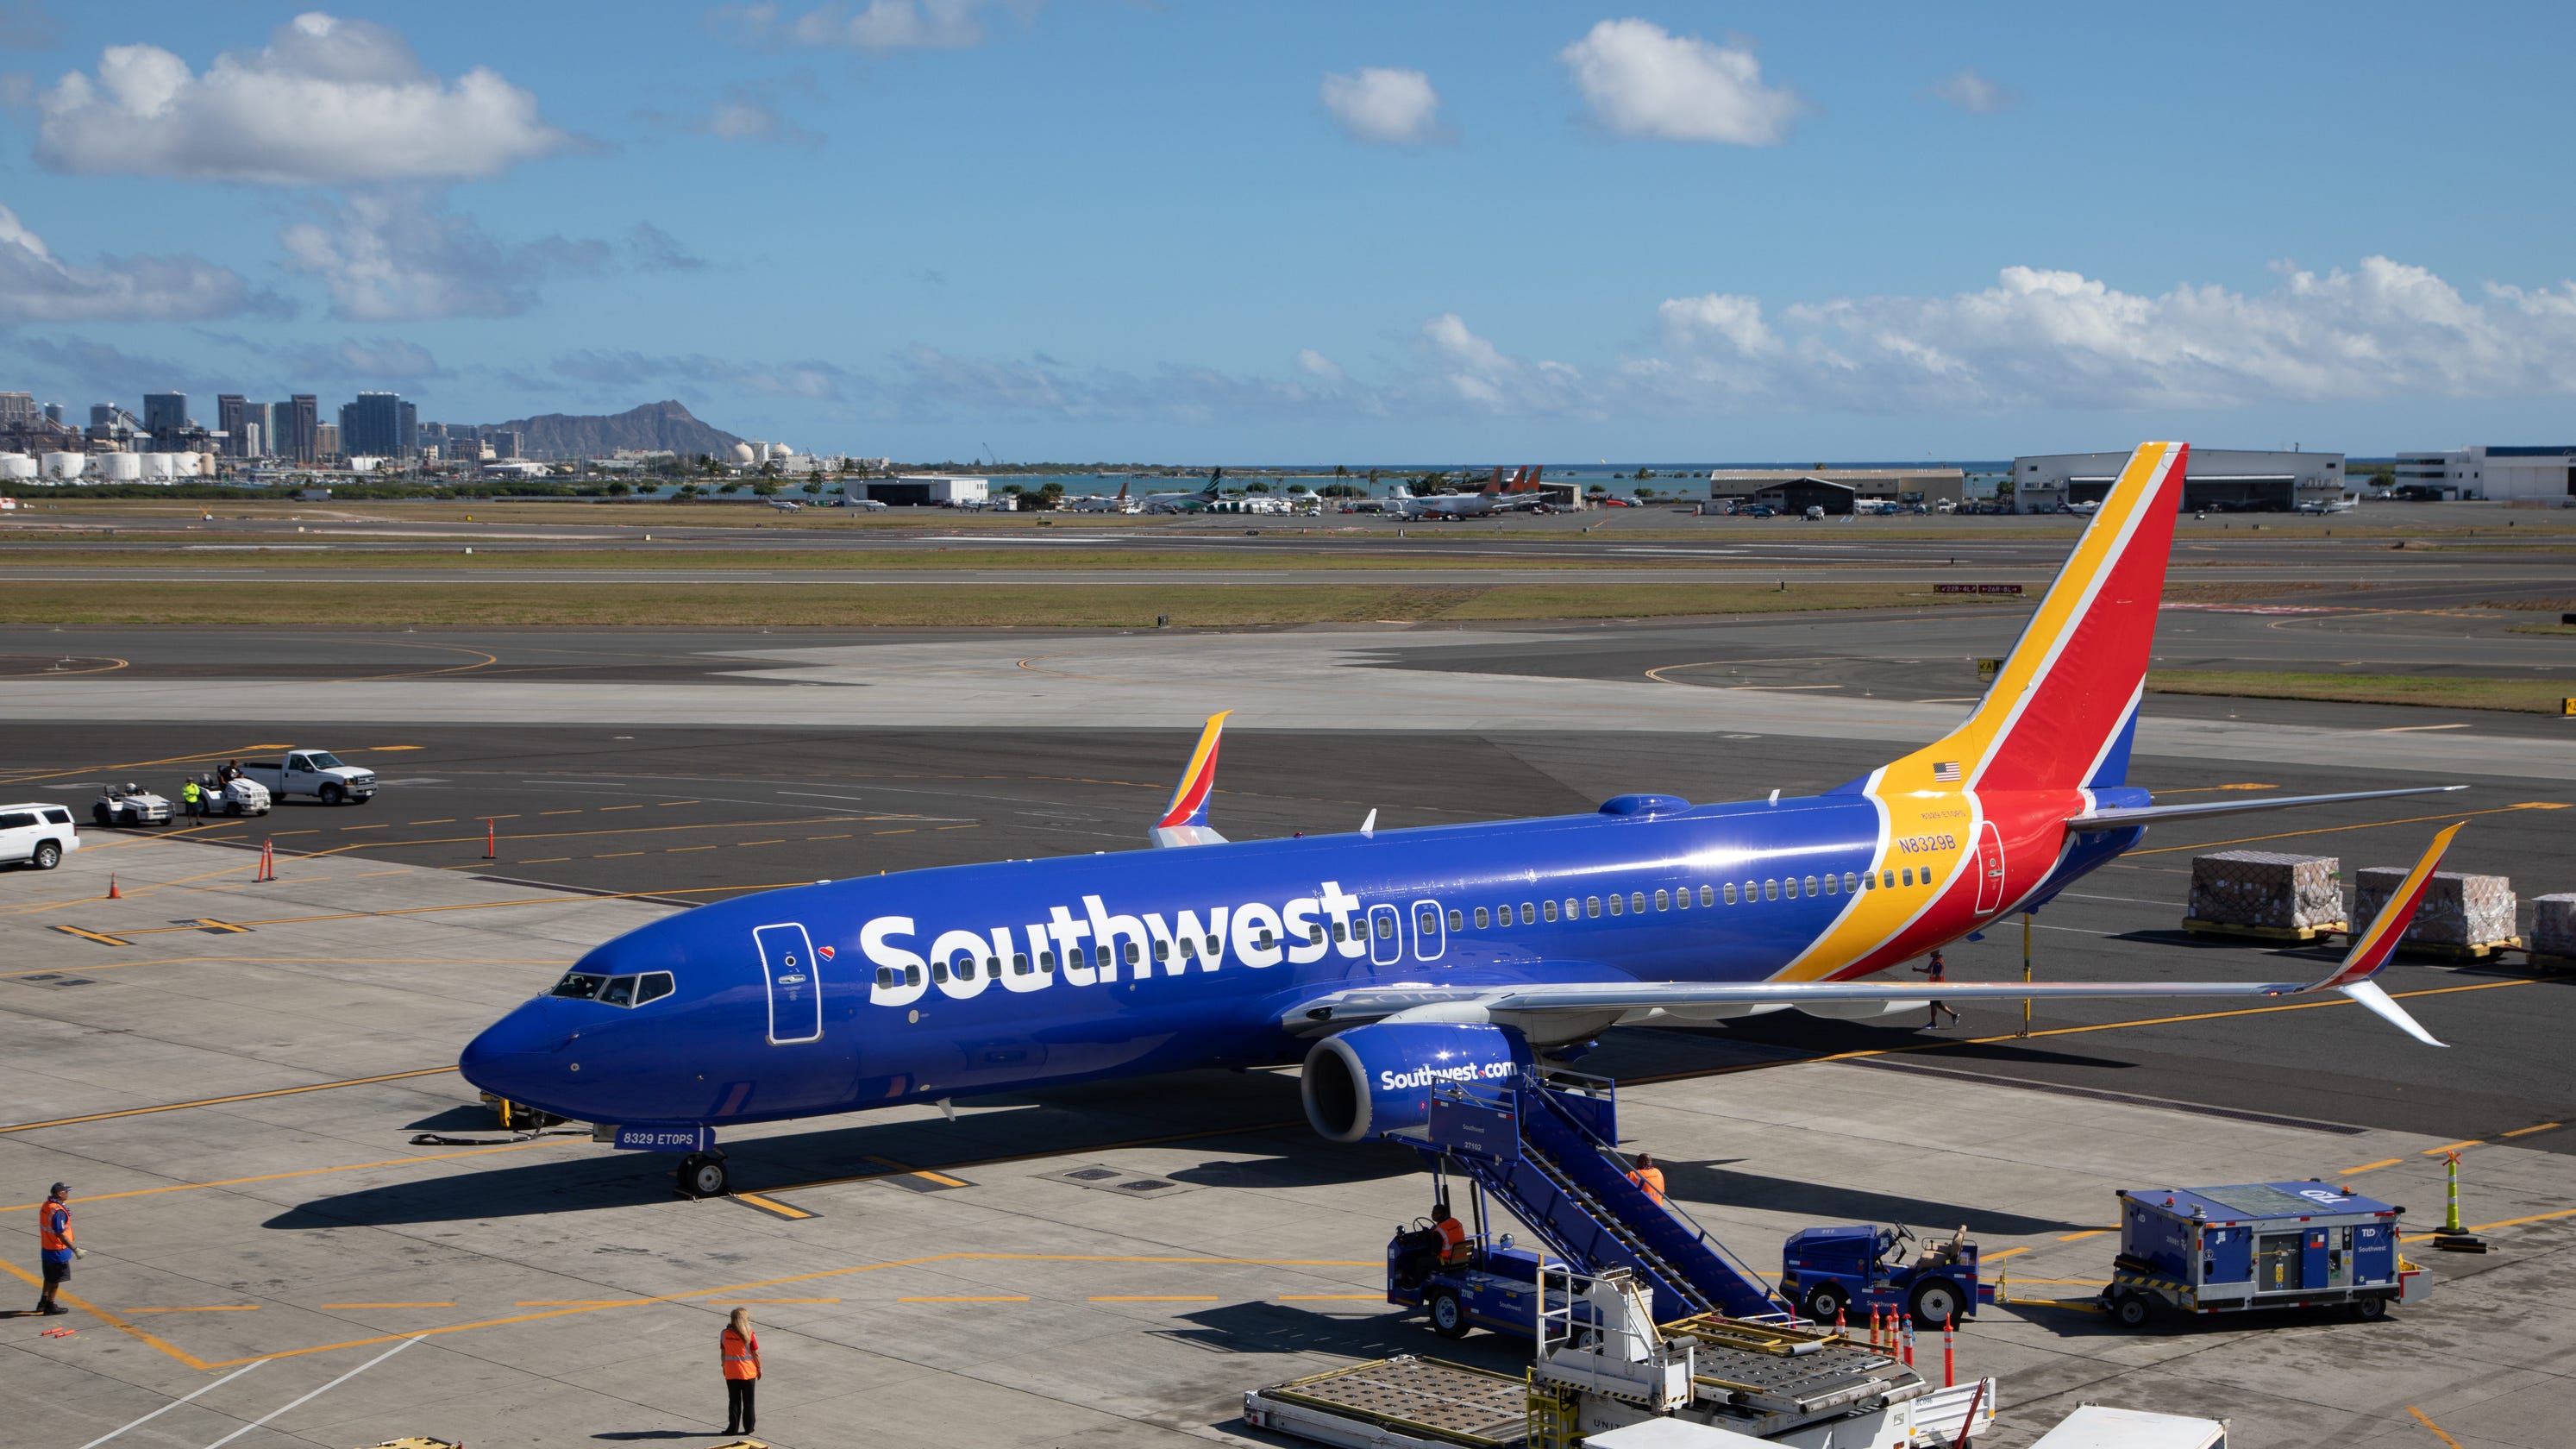 Southwest Airlines: Hawaii flight tests continue with return to Dallas